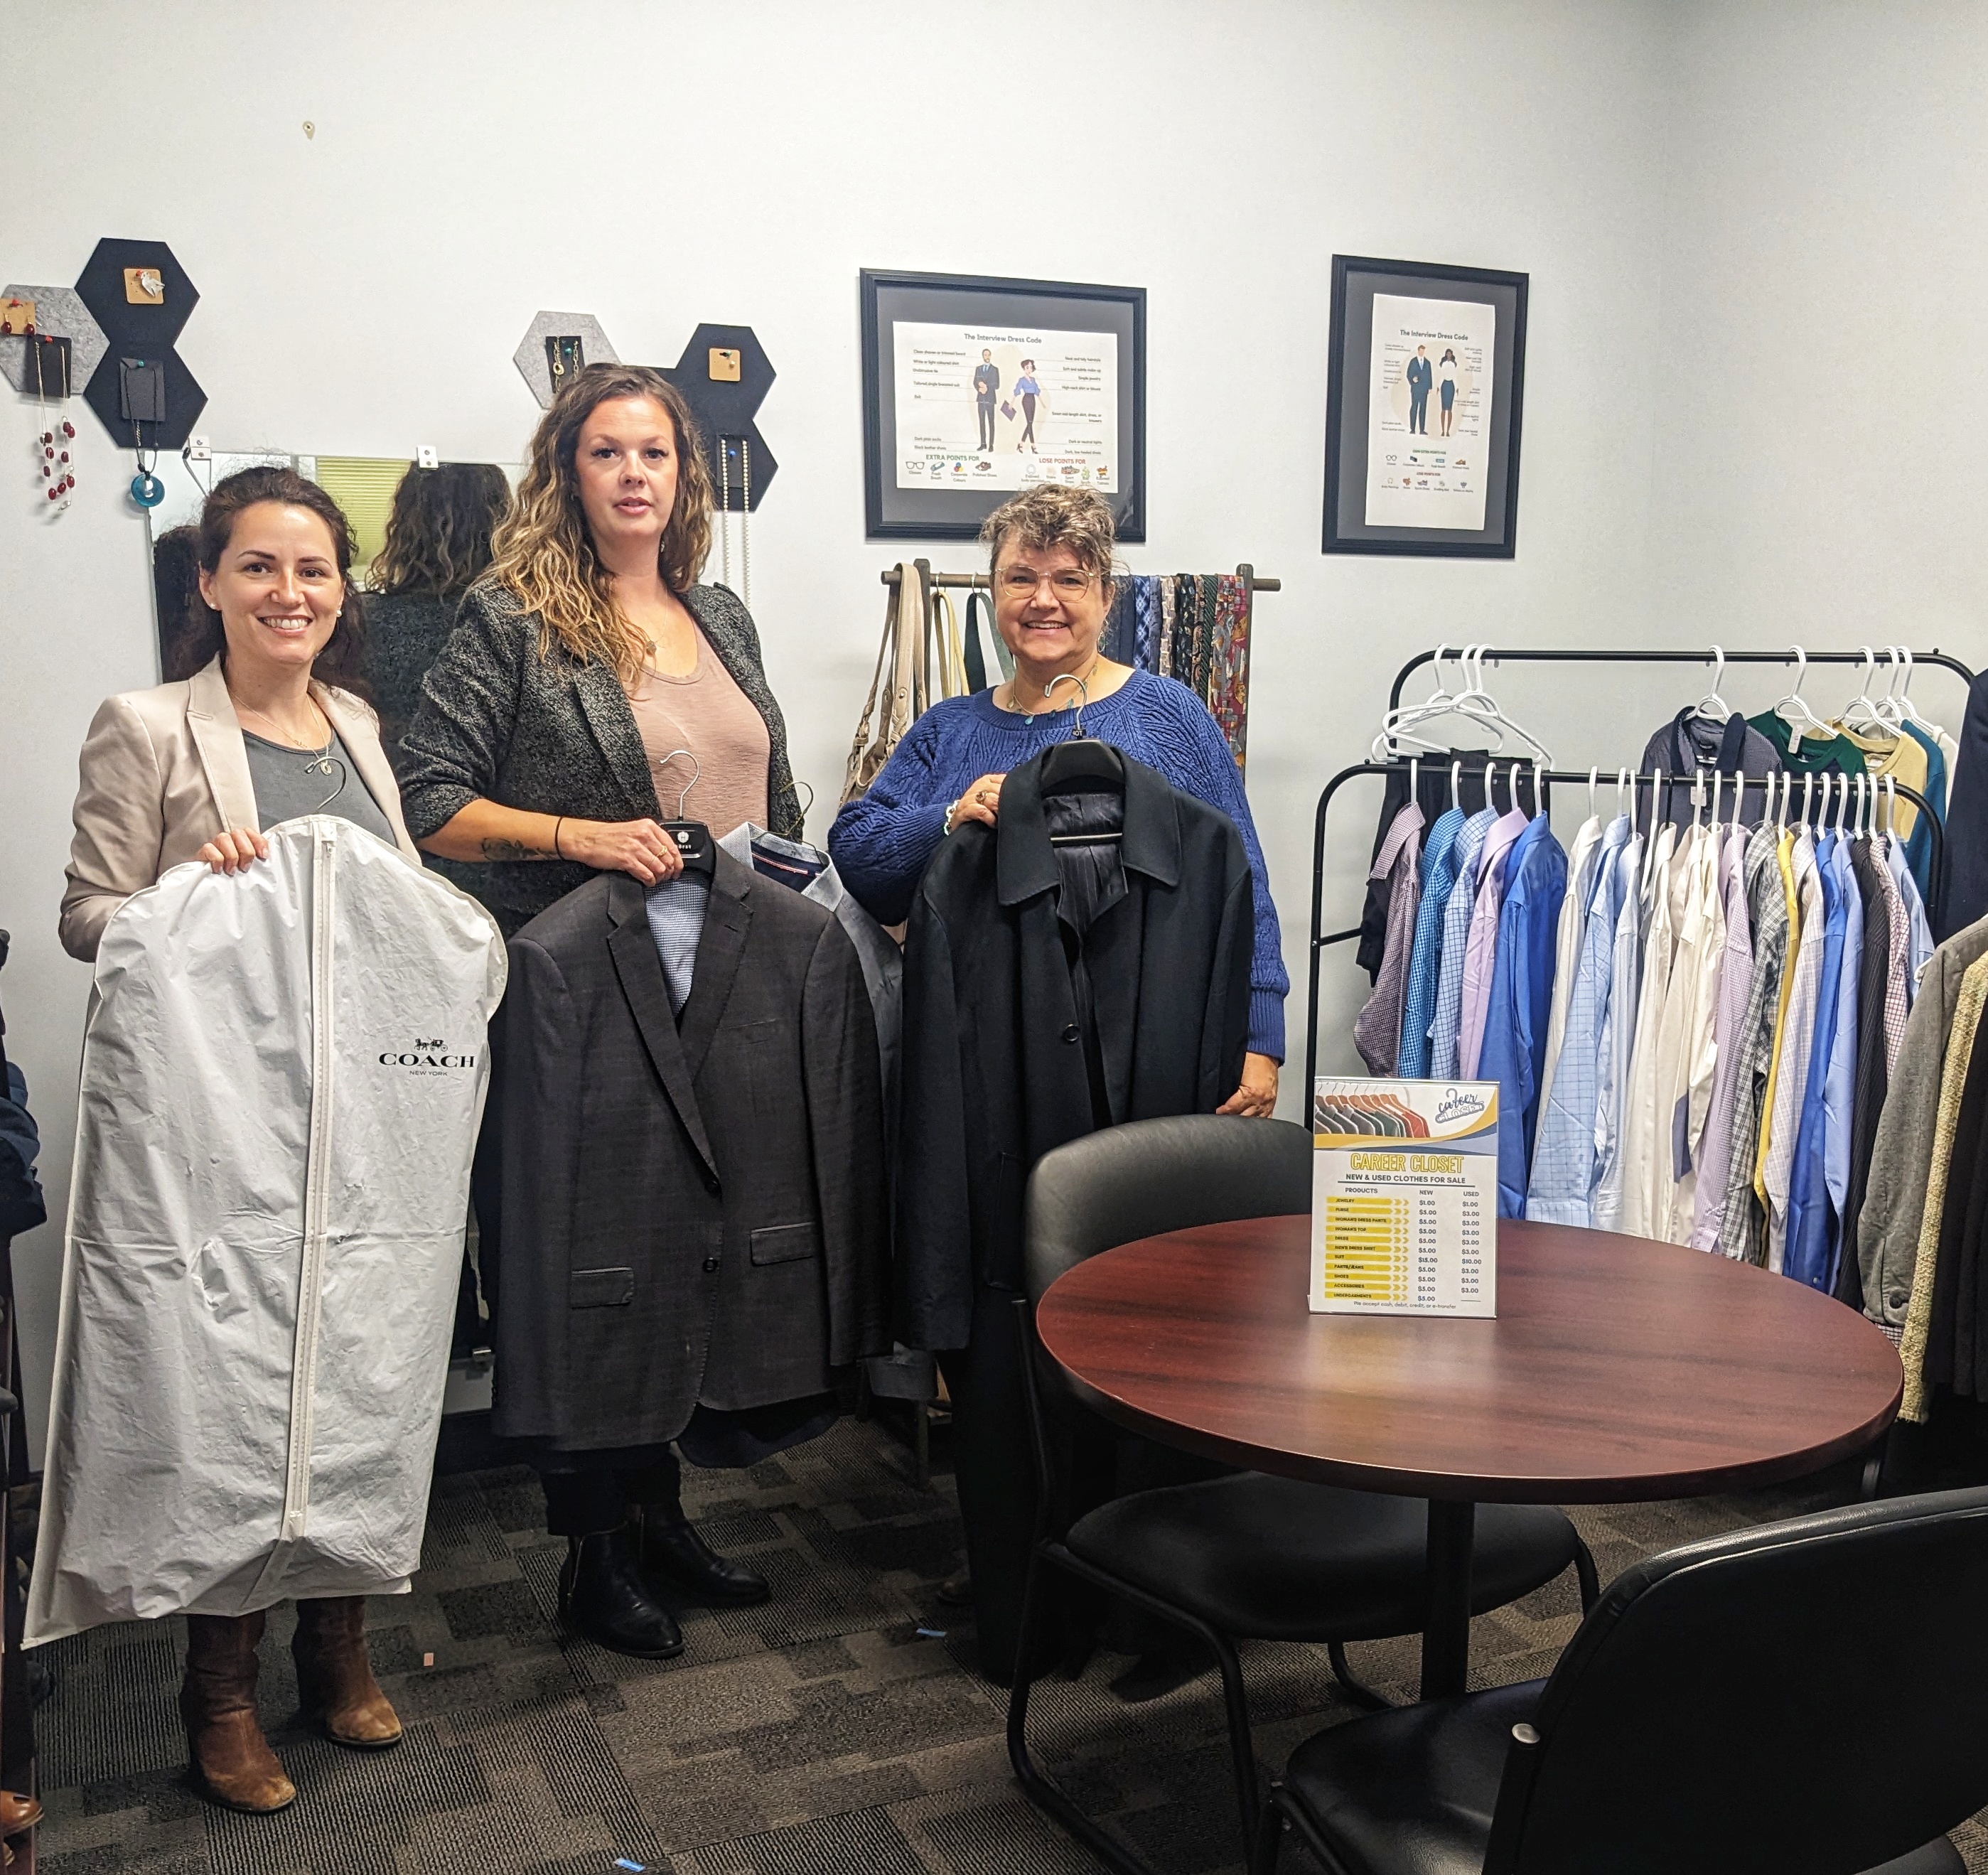 Career Closet: Get the Outfit, Get the Job - City of Belleville